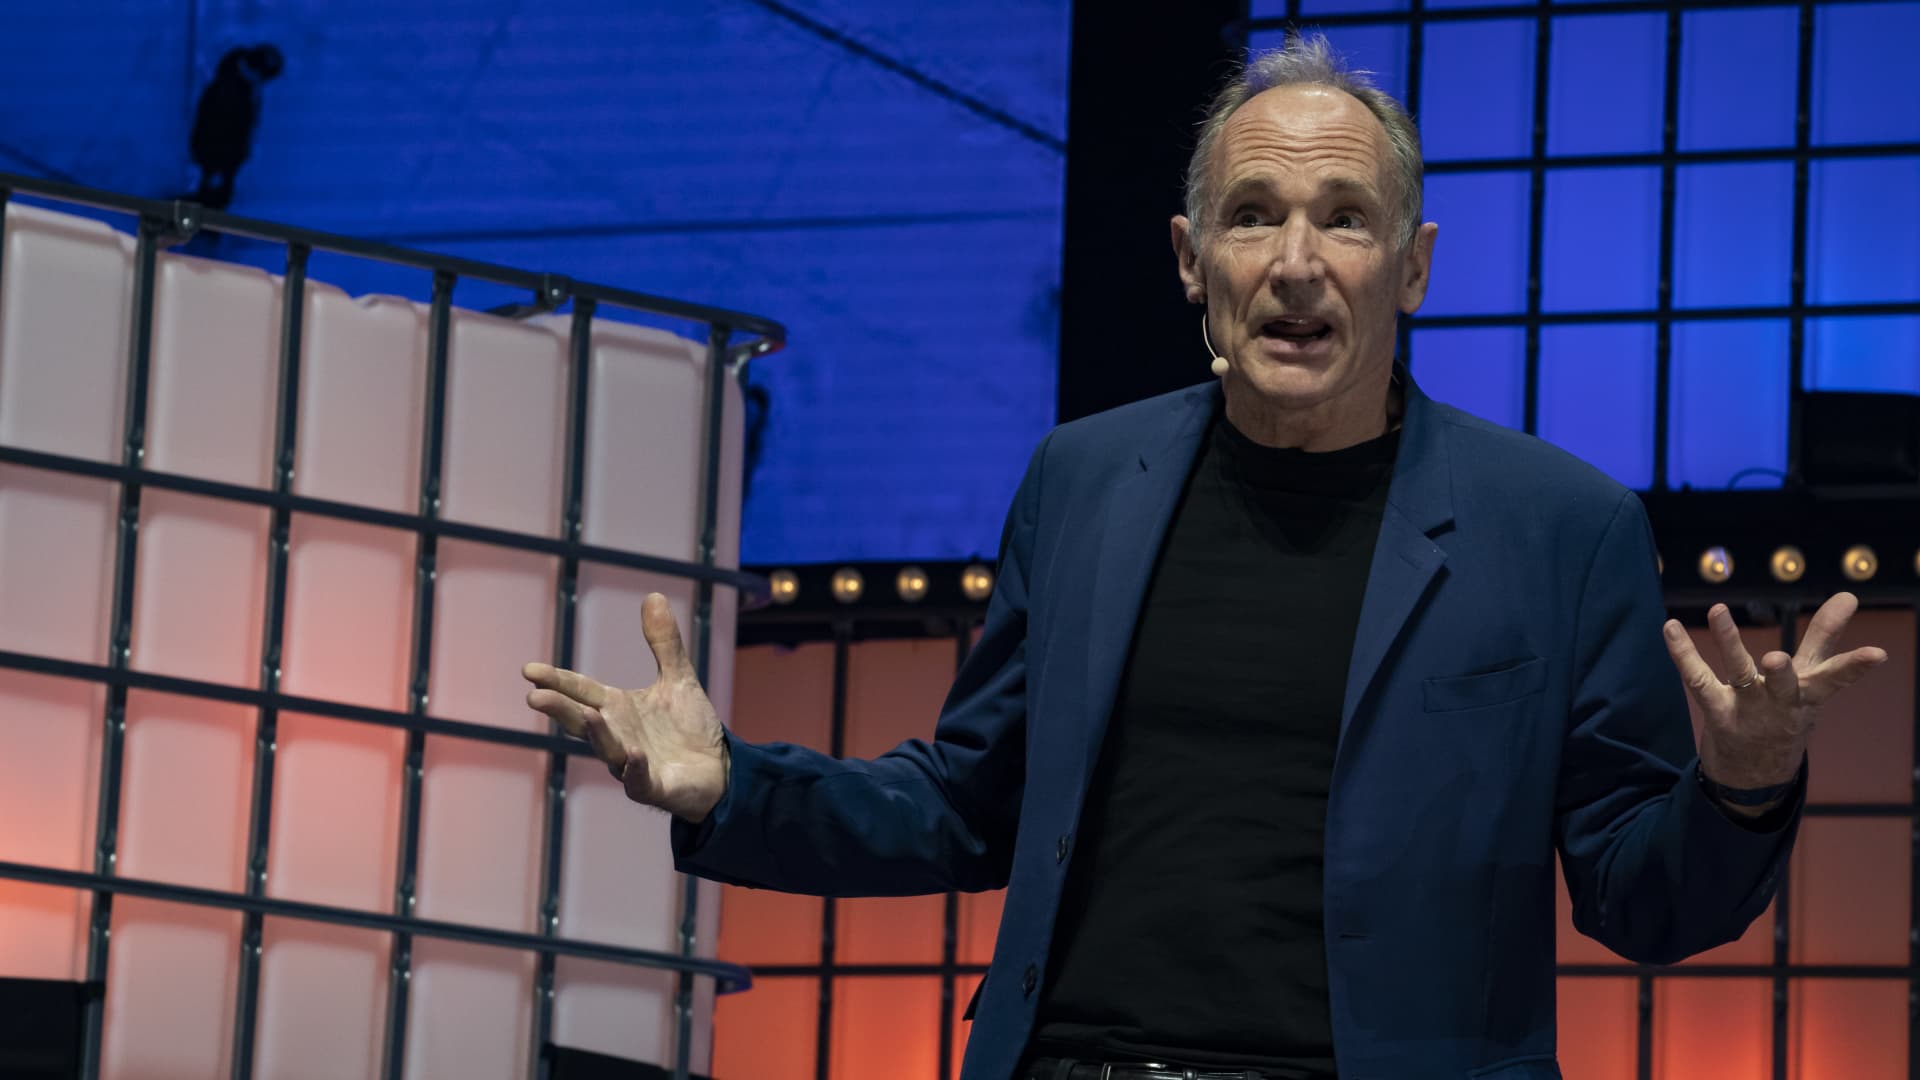 World Wide Web inventor Tim Berners-Lee calls crypto ‘dangerous’ and likens it to gambling